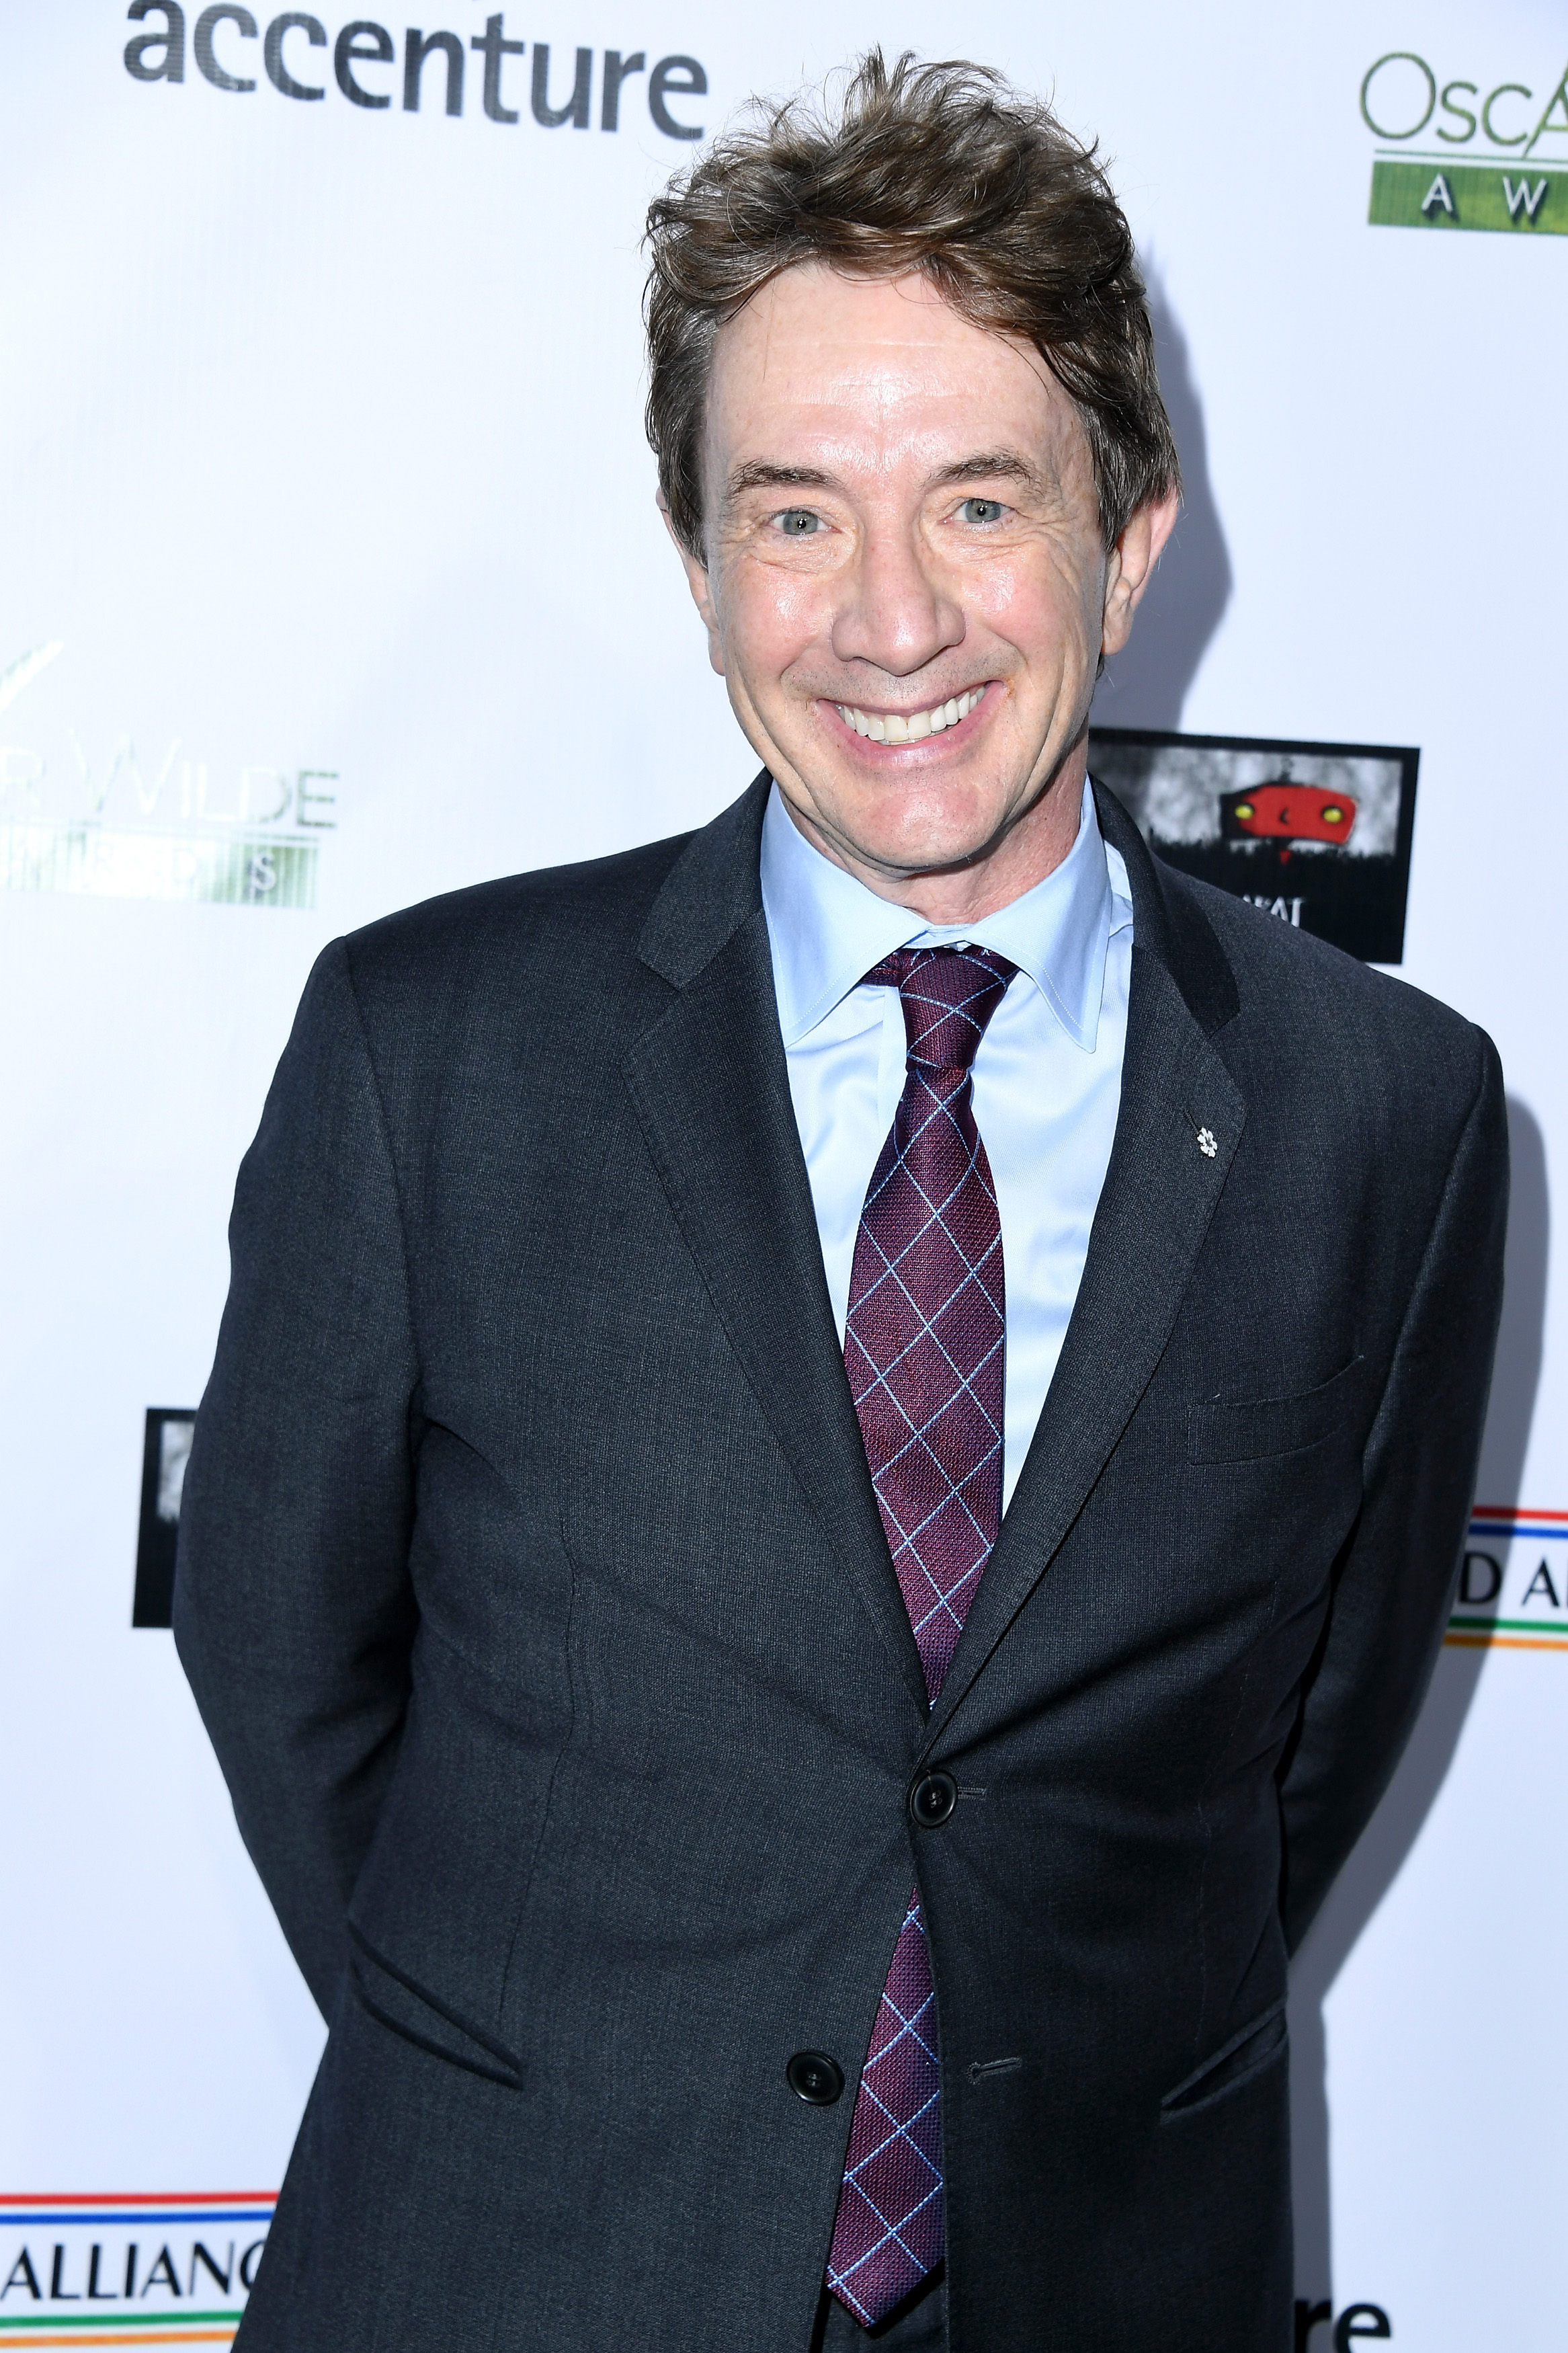 Martin Short attends the 13th Annual Oscar Wilde Awards in Santa Monica, California, on March 1, 2018. | Source: Getty Images